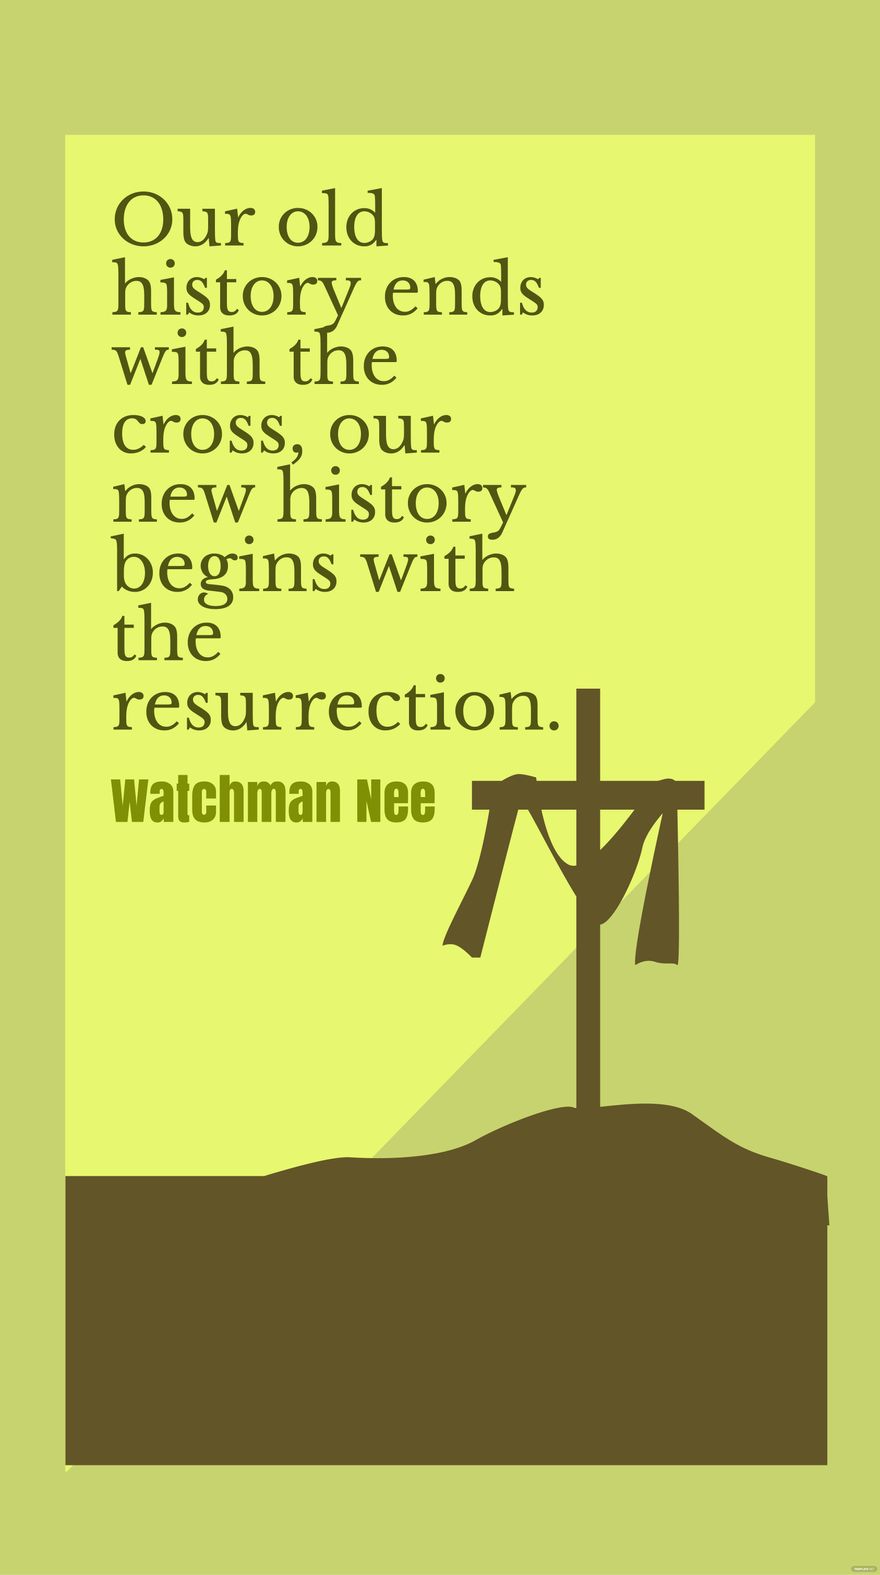 Watchman Nee - Our old history ends with the cross, our new history begins with the resurrection. in JPG